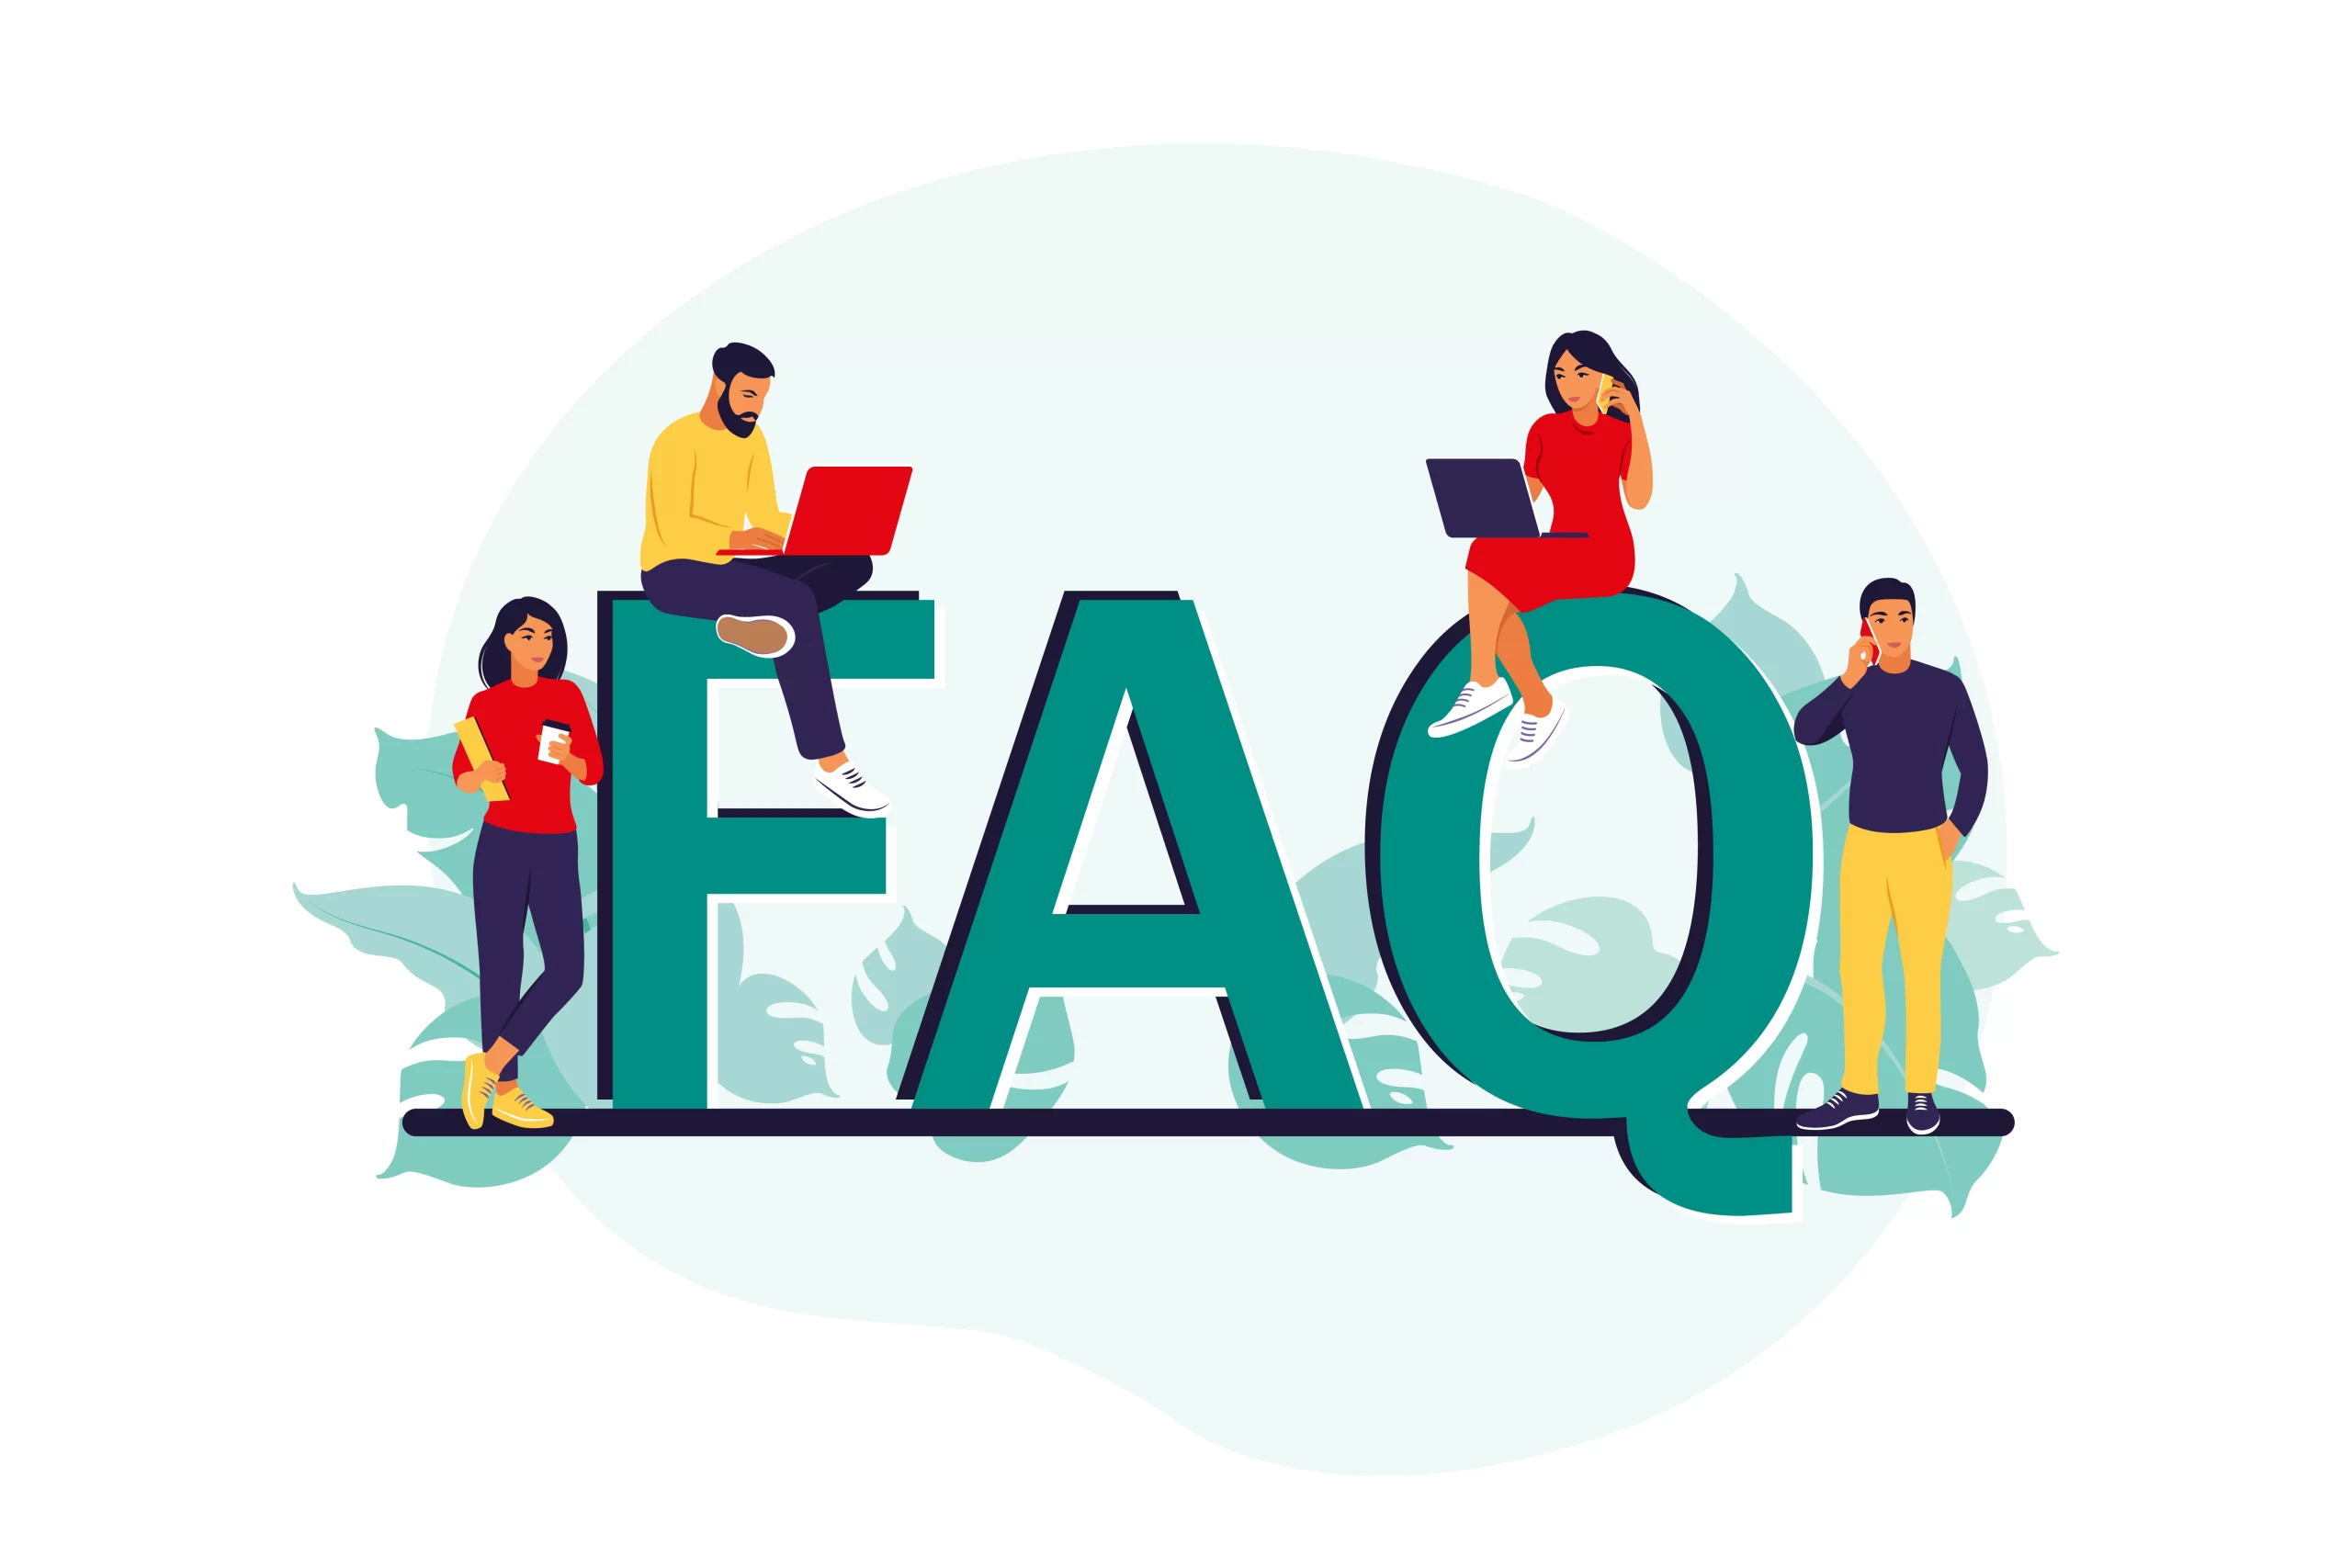 Tinywow Faq Frequently Asked Questions Concept People Ask Questions And Receive Answers Support Center Illustration Flat Vector 31041528 Scaled